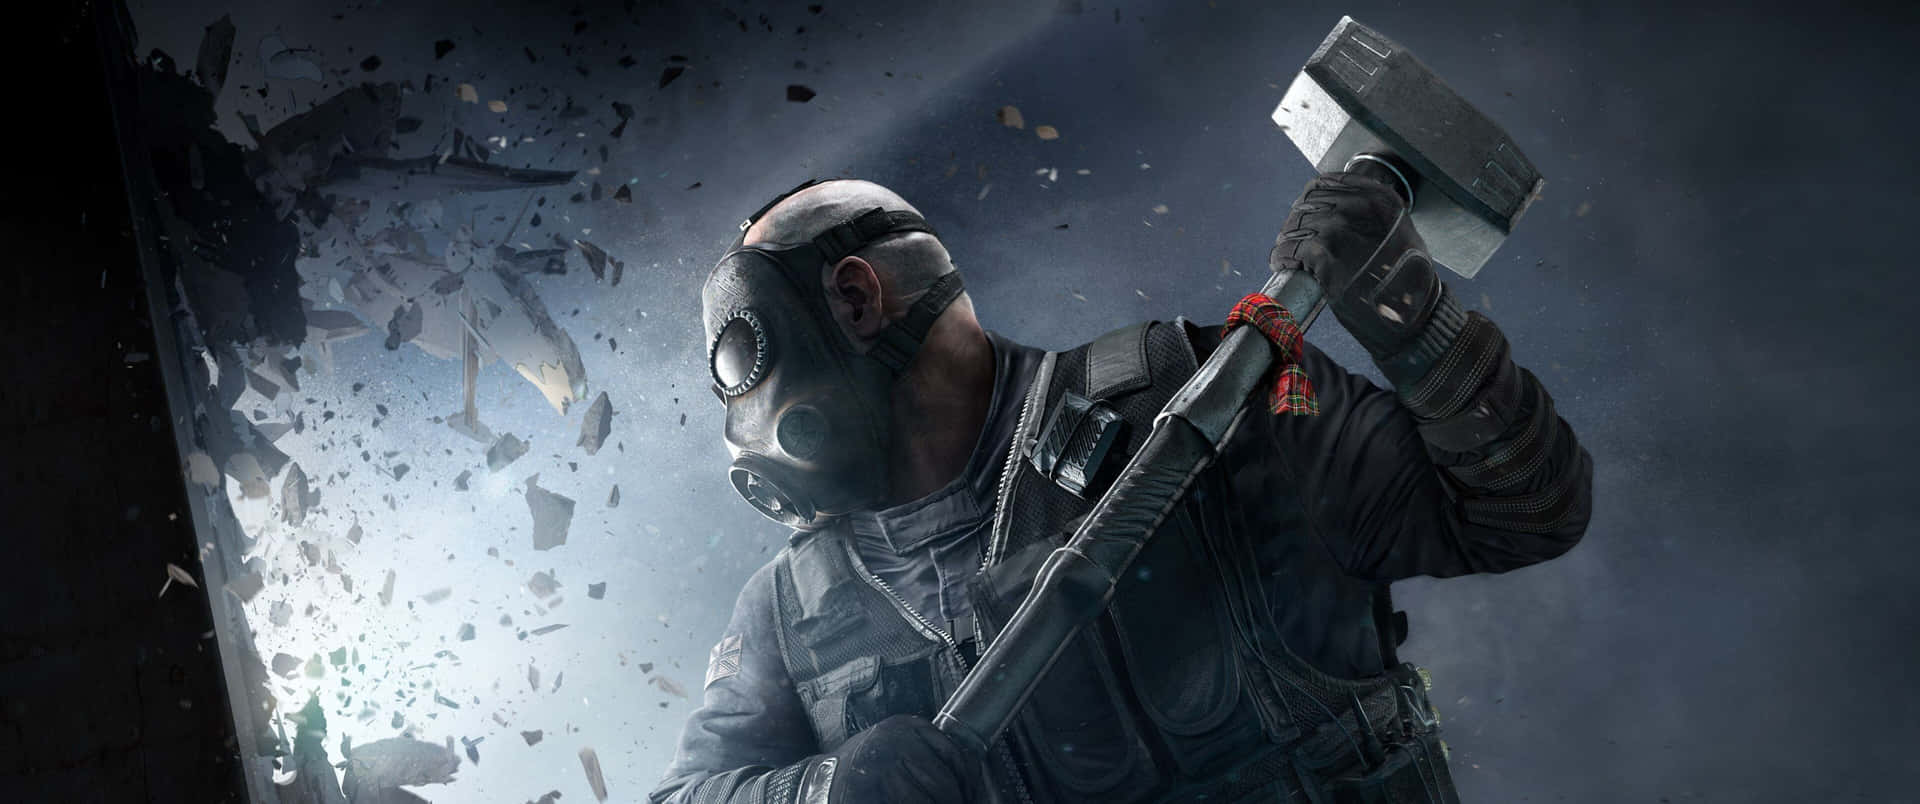 Experience the never-ending battle of Rainbow Six Siege with 3440x1440p